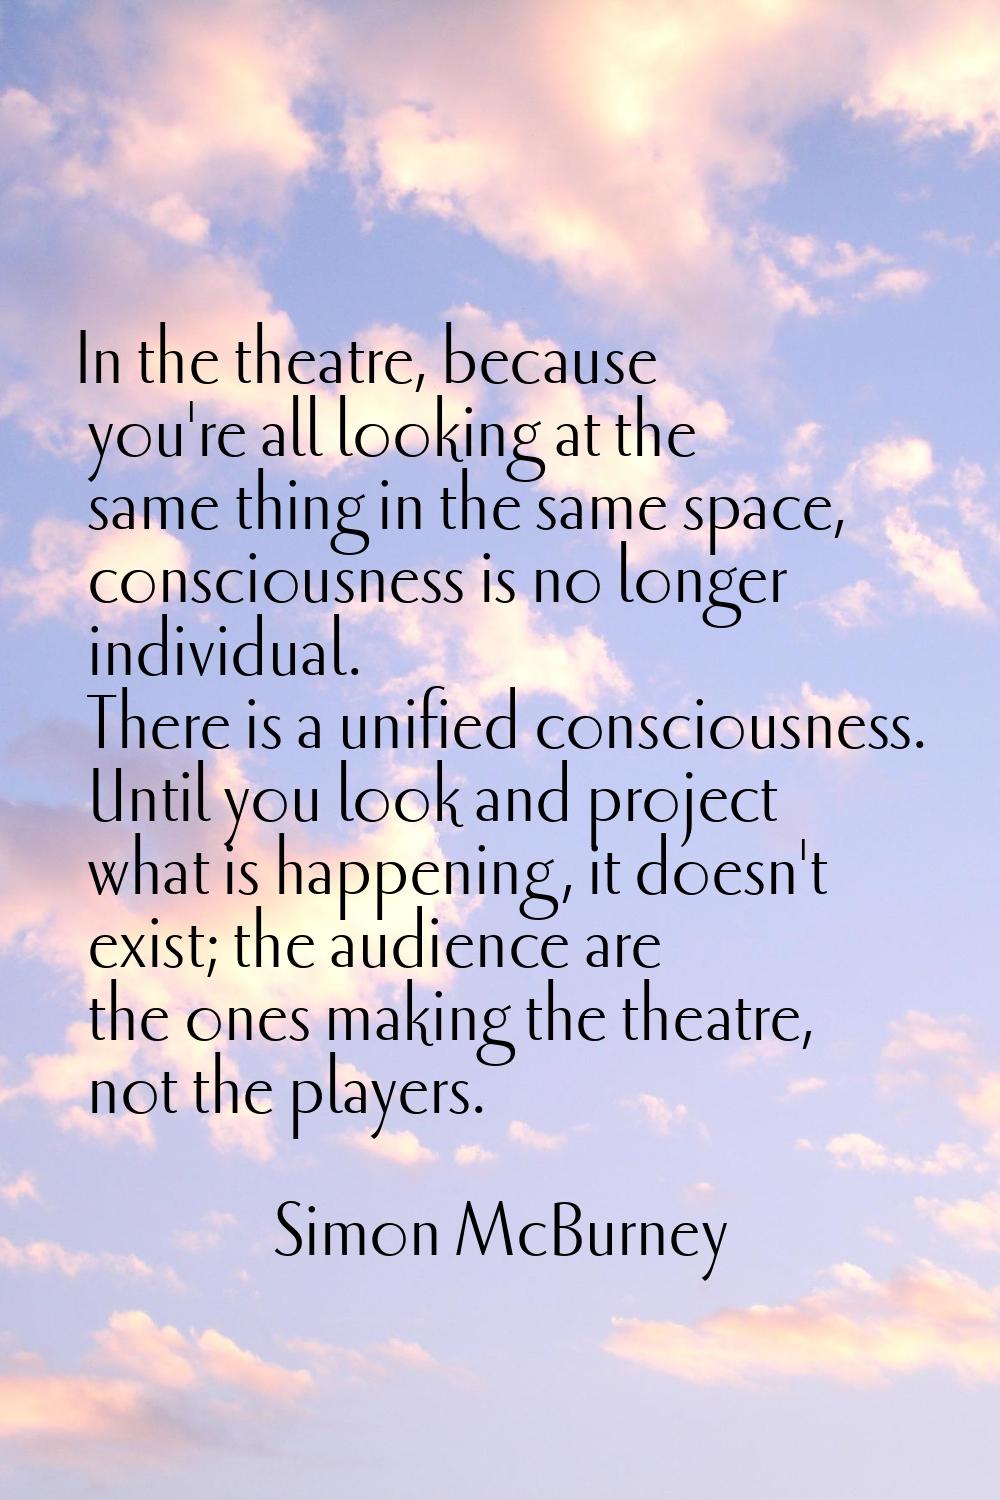 In the theatre, because you're all looking at the same thing in the same space, consciousness is no